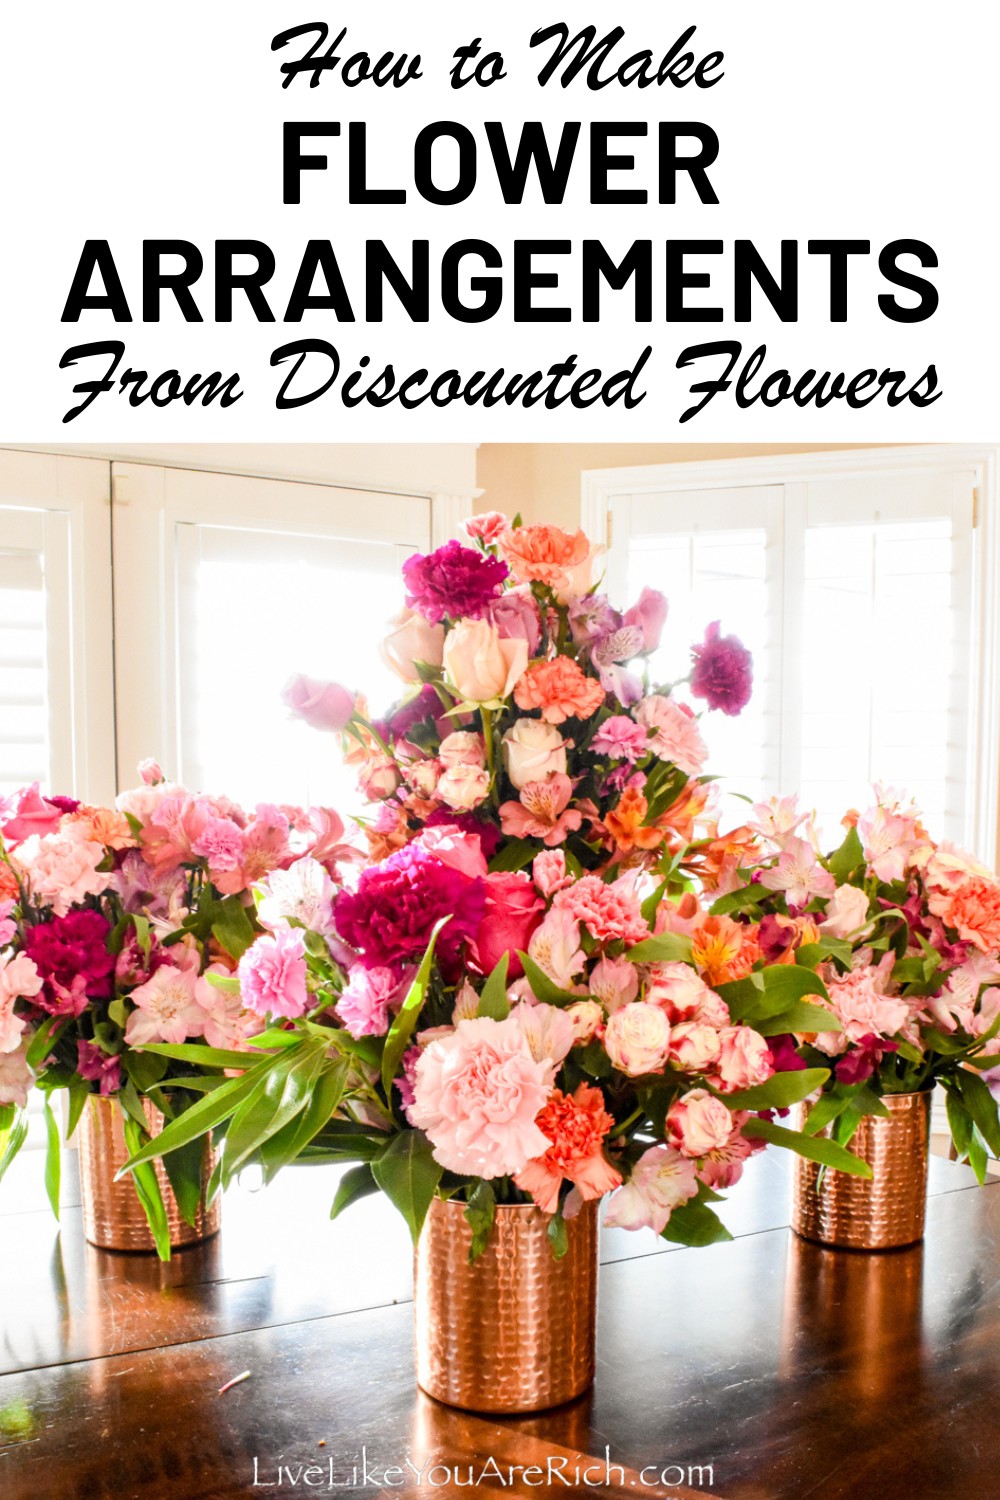 How to Make Flower Arrangements From Discounted Flowers